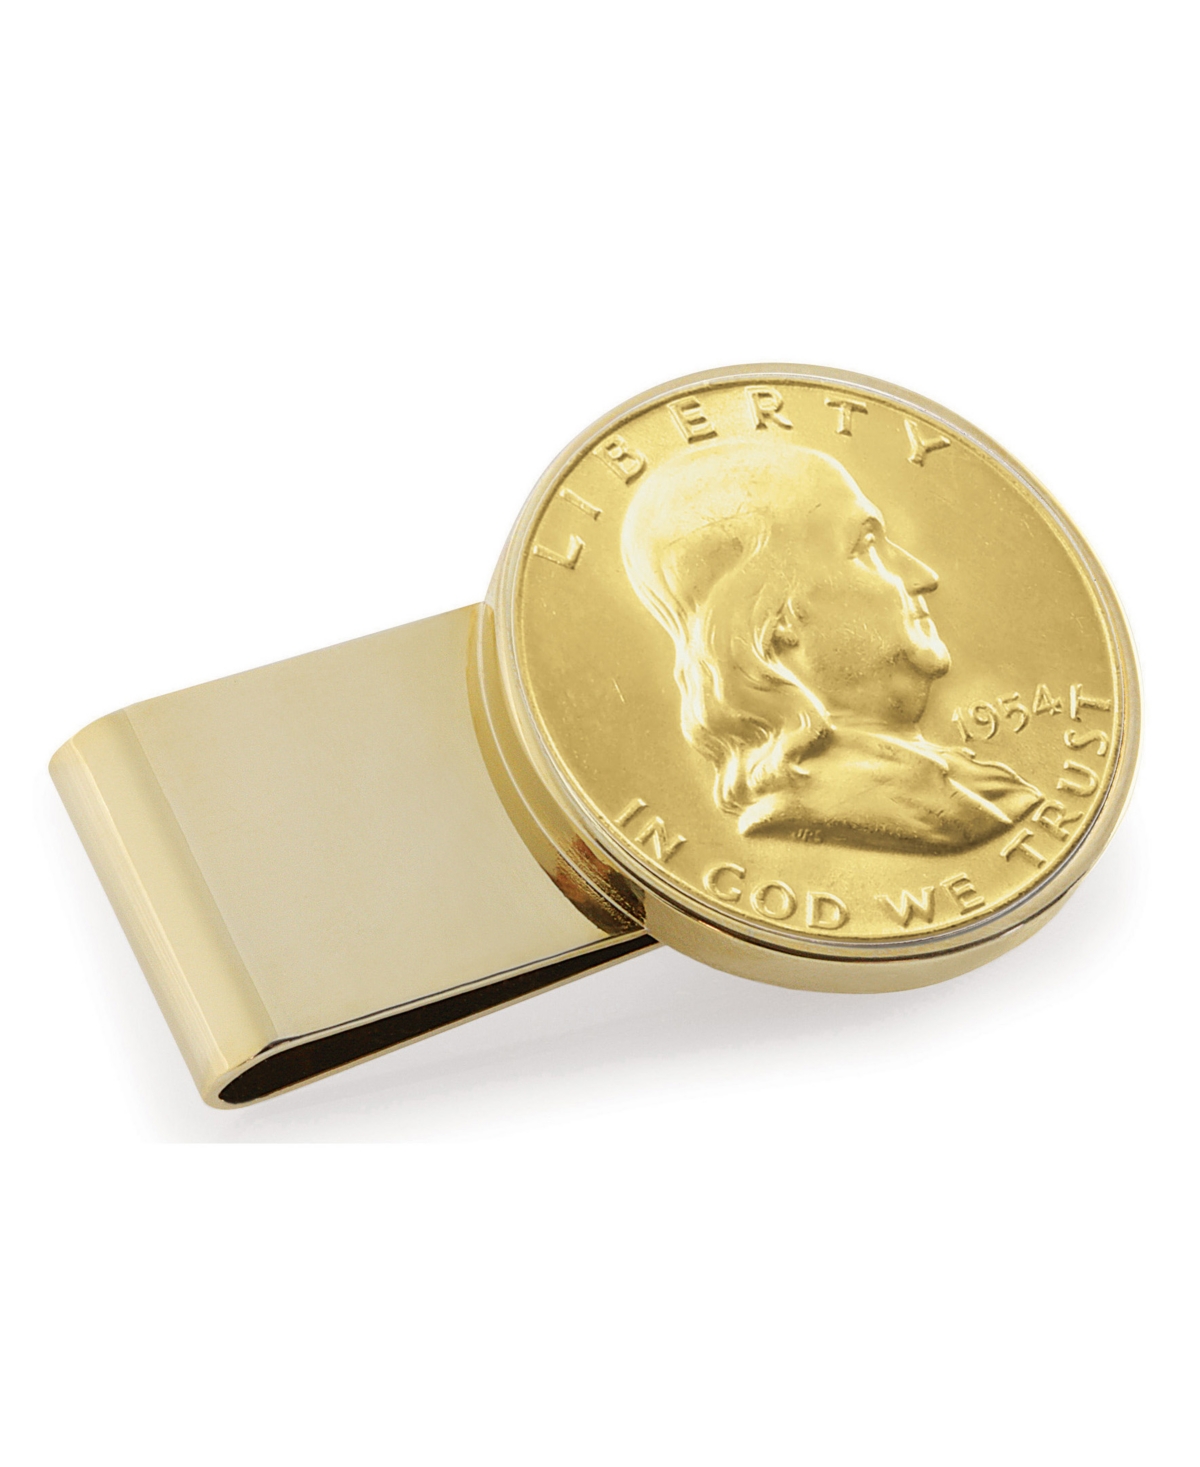 Men's American Coin Treasures Gold-Layered Silver Franklin Half Dollar Stainless Steel Coin Money Clip - Gold